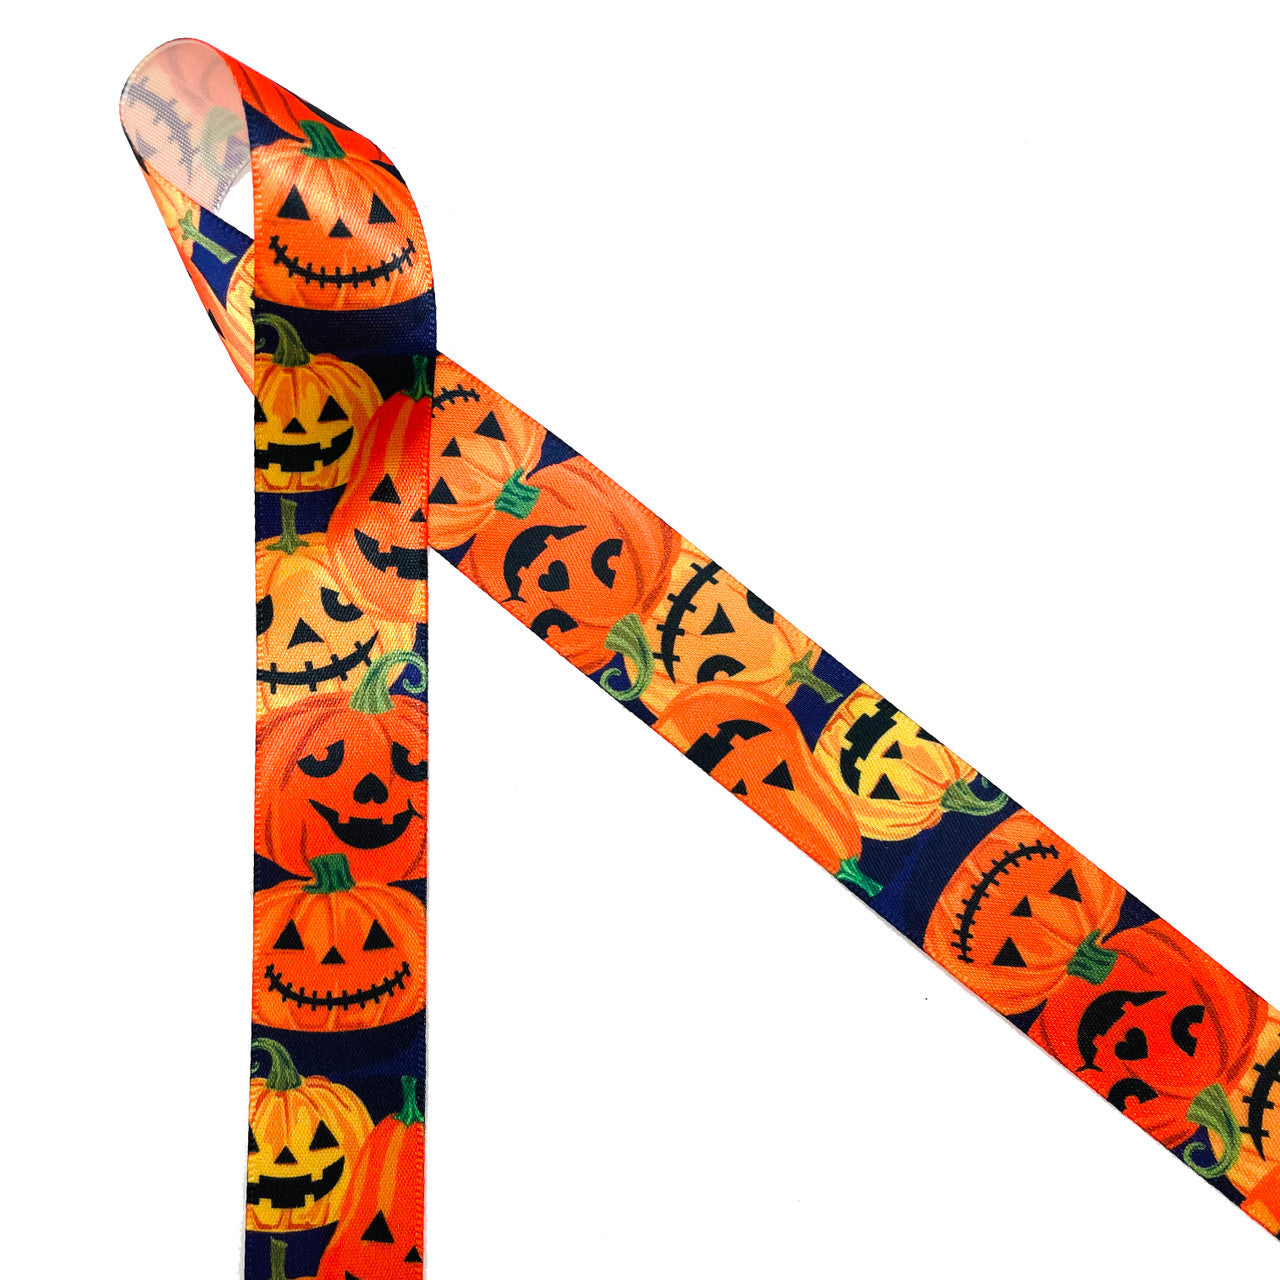 Jack O' Lanterns with fun sunny smiles will make all your Halloween decorations and favors truly stand out!